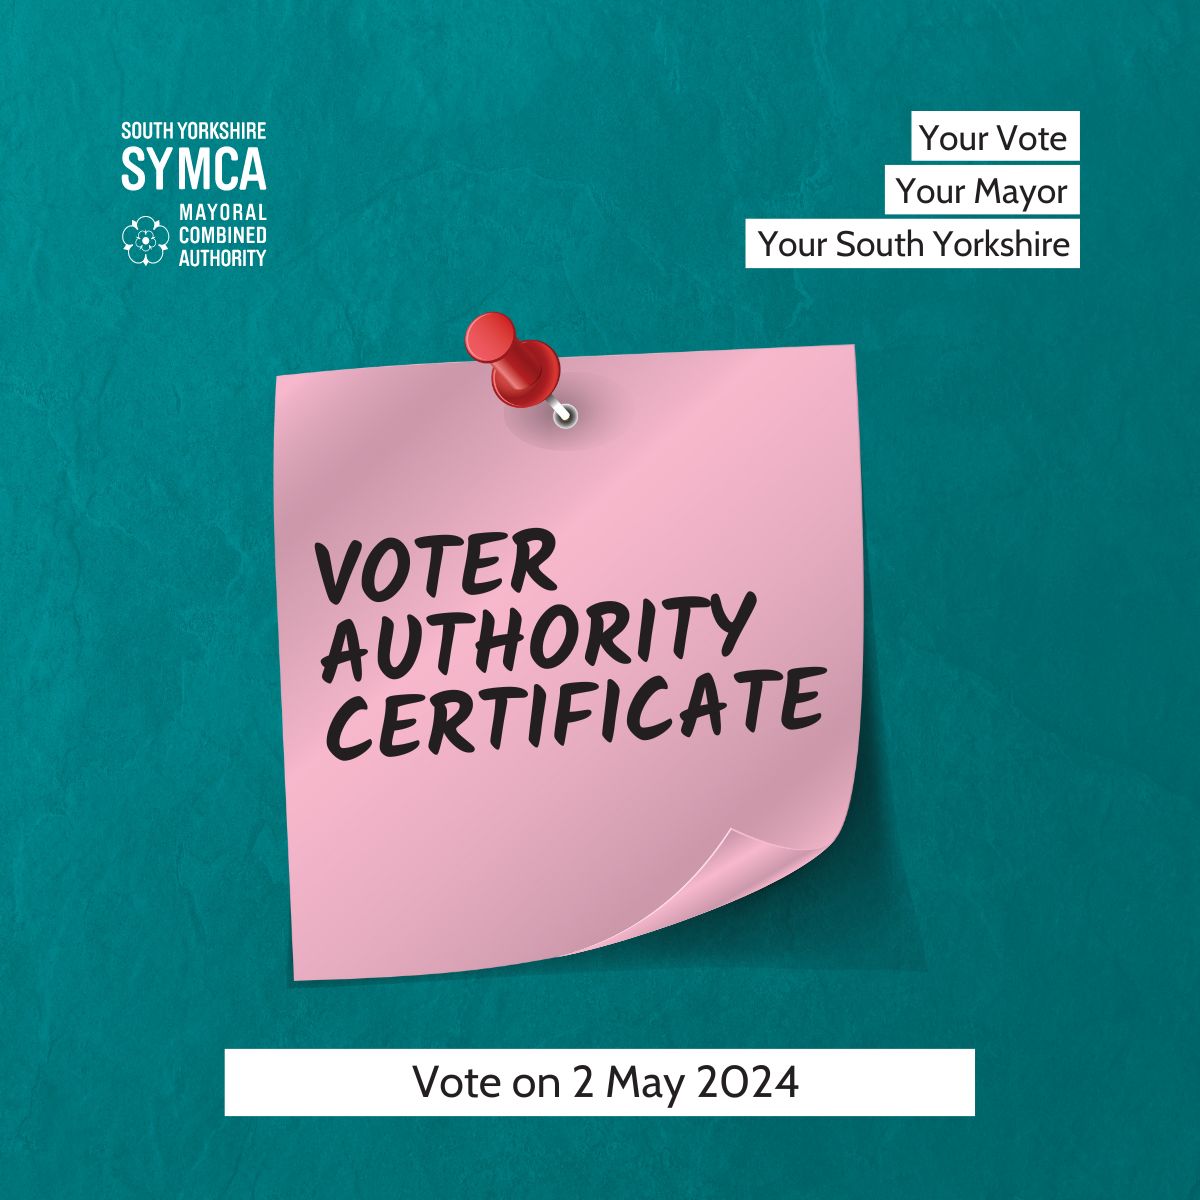 Tomorrow is the last day you can apply for a Voter Authority Certificate (VAC). If you don’t have an approved form of ID, you’ll need to apply for a free VAC before 5pm tomorrow. Find out more here: orlo.uk/3WfhB